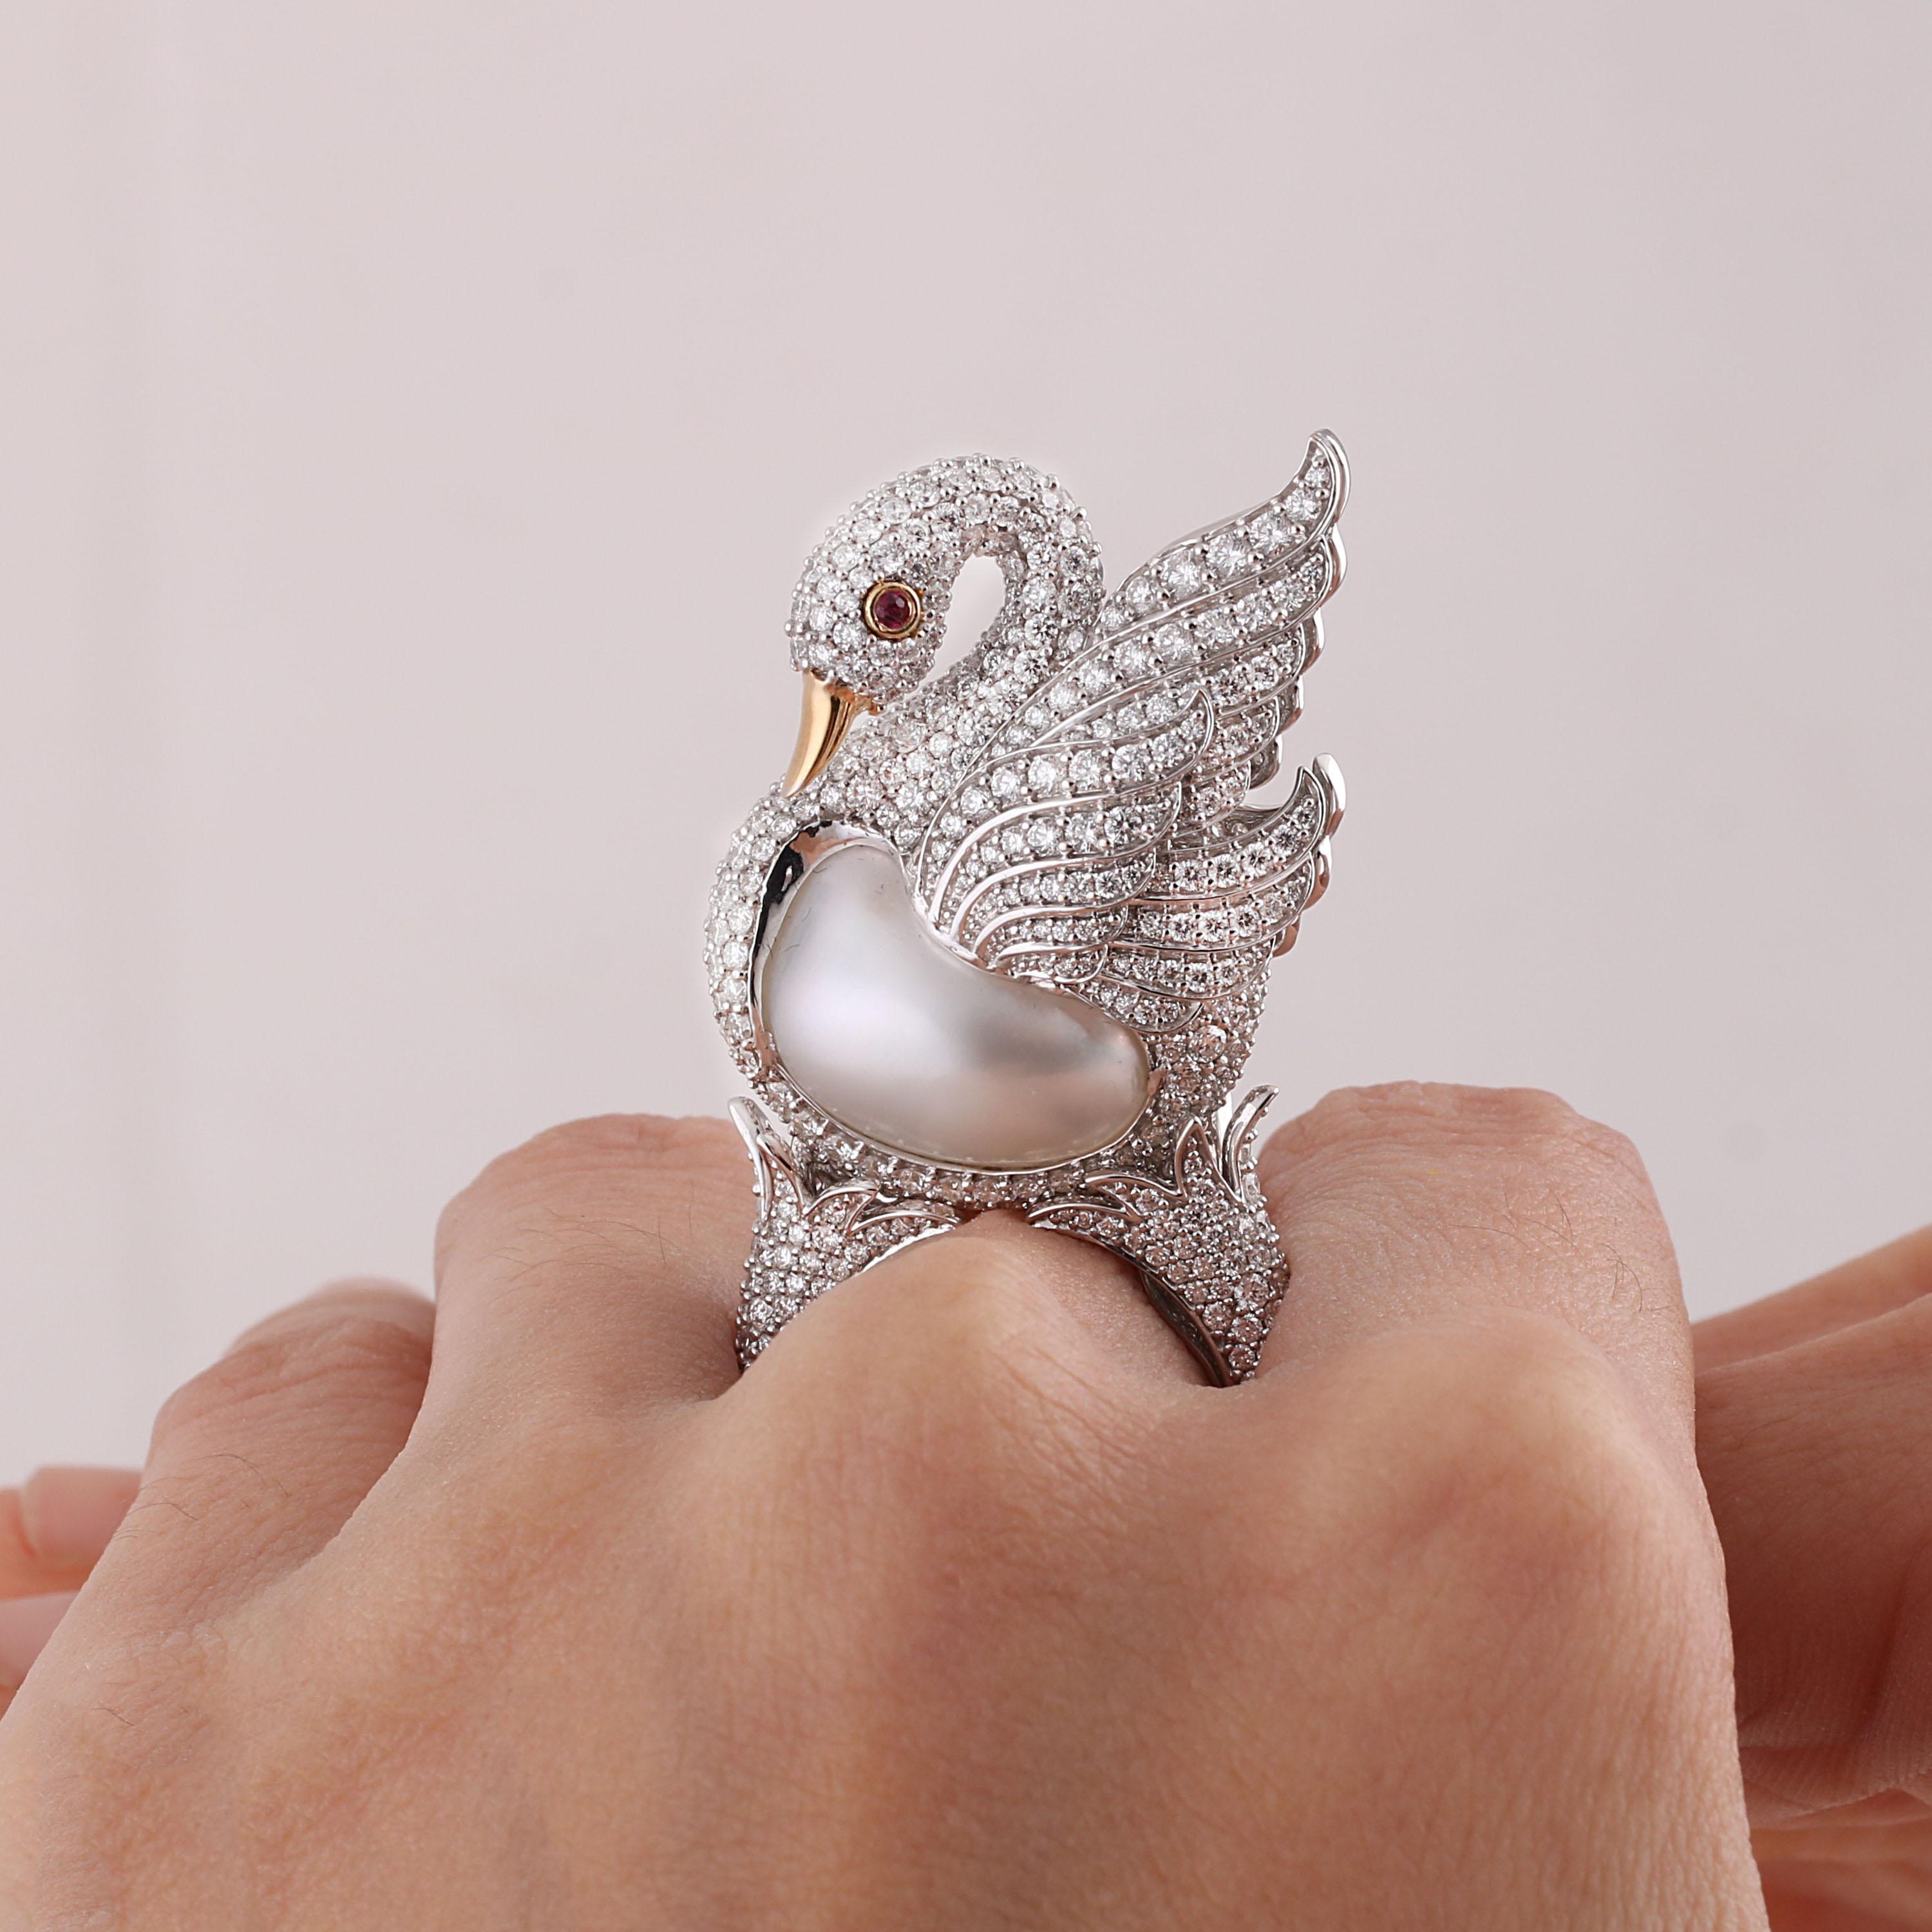 Gross Weight: 23.67 Grams
Diamond Weight: 6.17 cts
Ruby Weight: 0.03 cts
Pearl Weight: 22.47 cts
Ring Size: US 5
IGI Certified

Video of the product can be shared upon request.

This cocktail ring is all you need to spread your wings as a bonafide